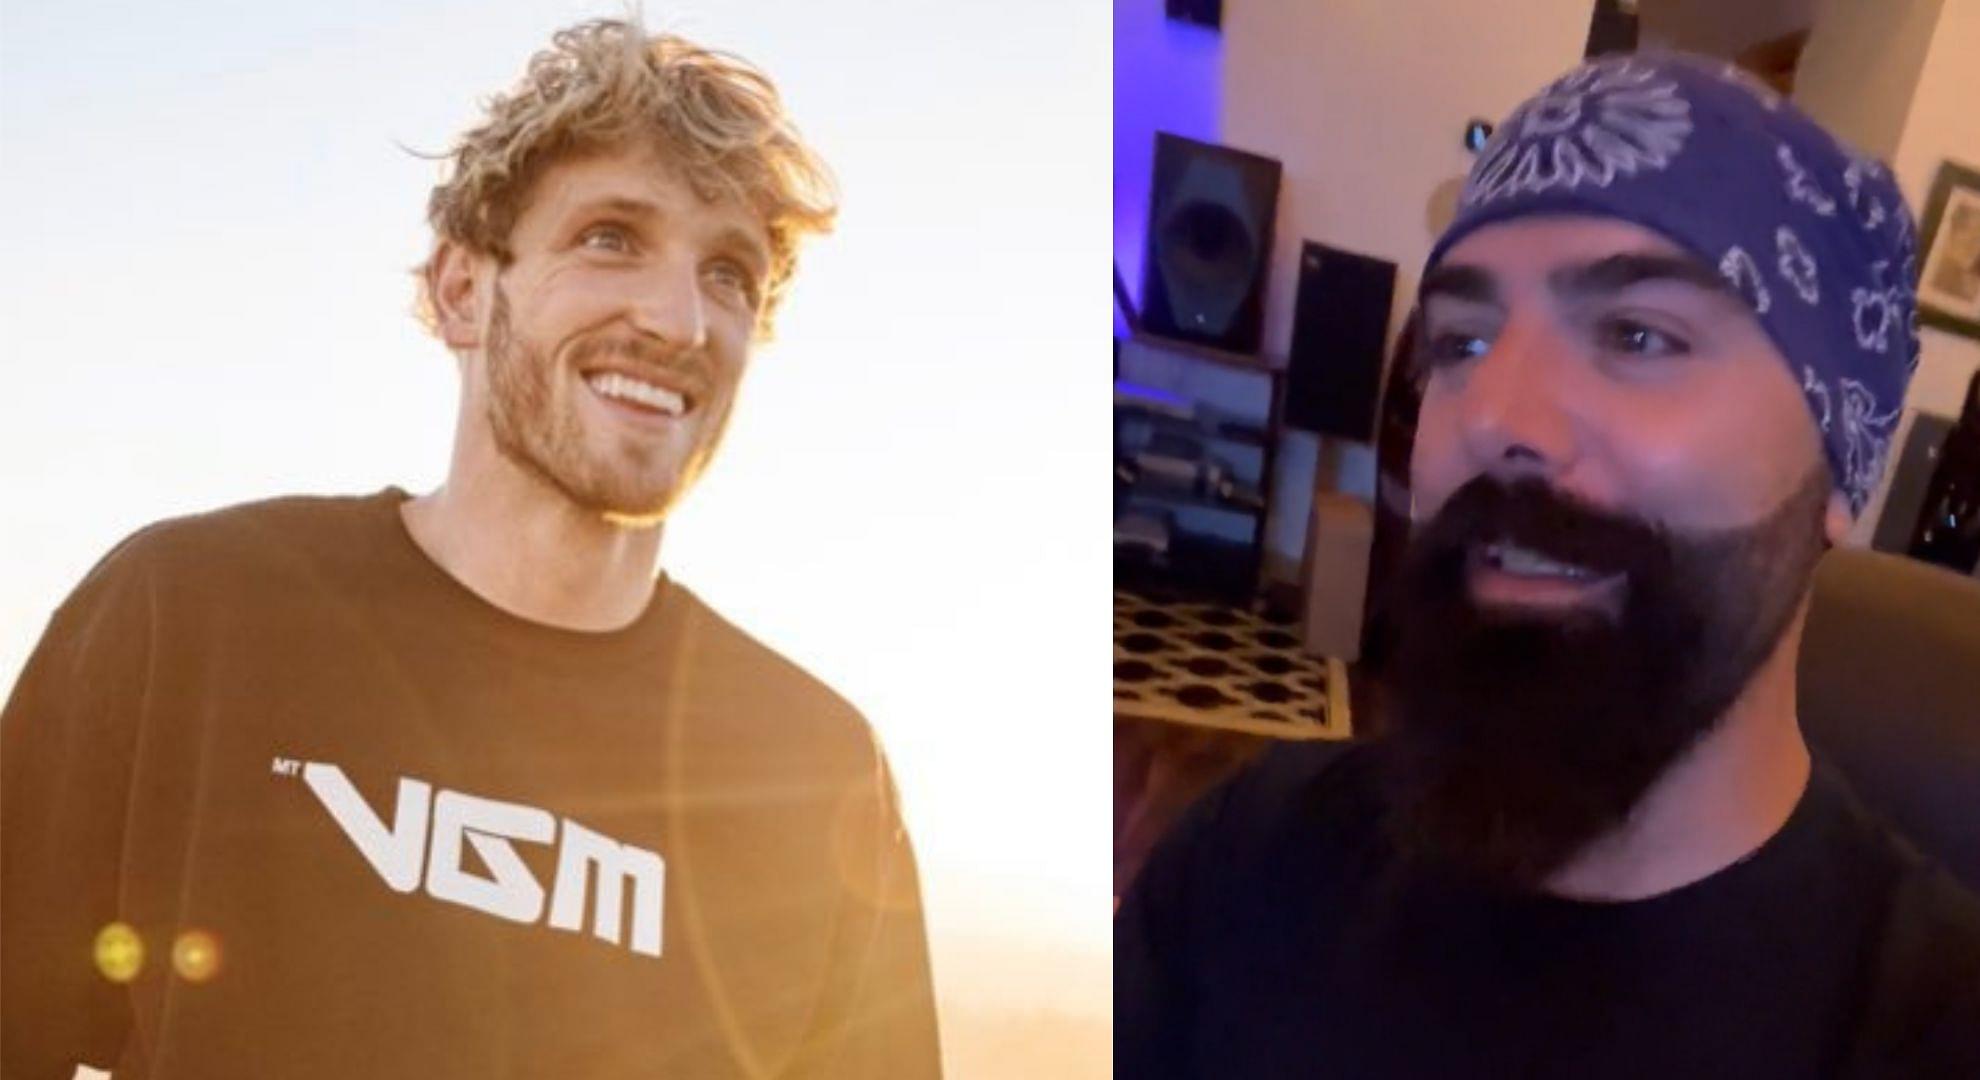 Keemstar is confidant that Logan Paul is using steroids